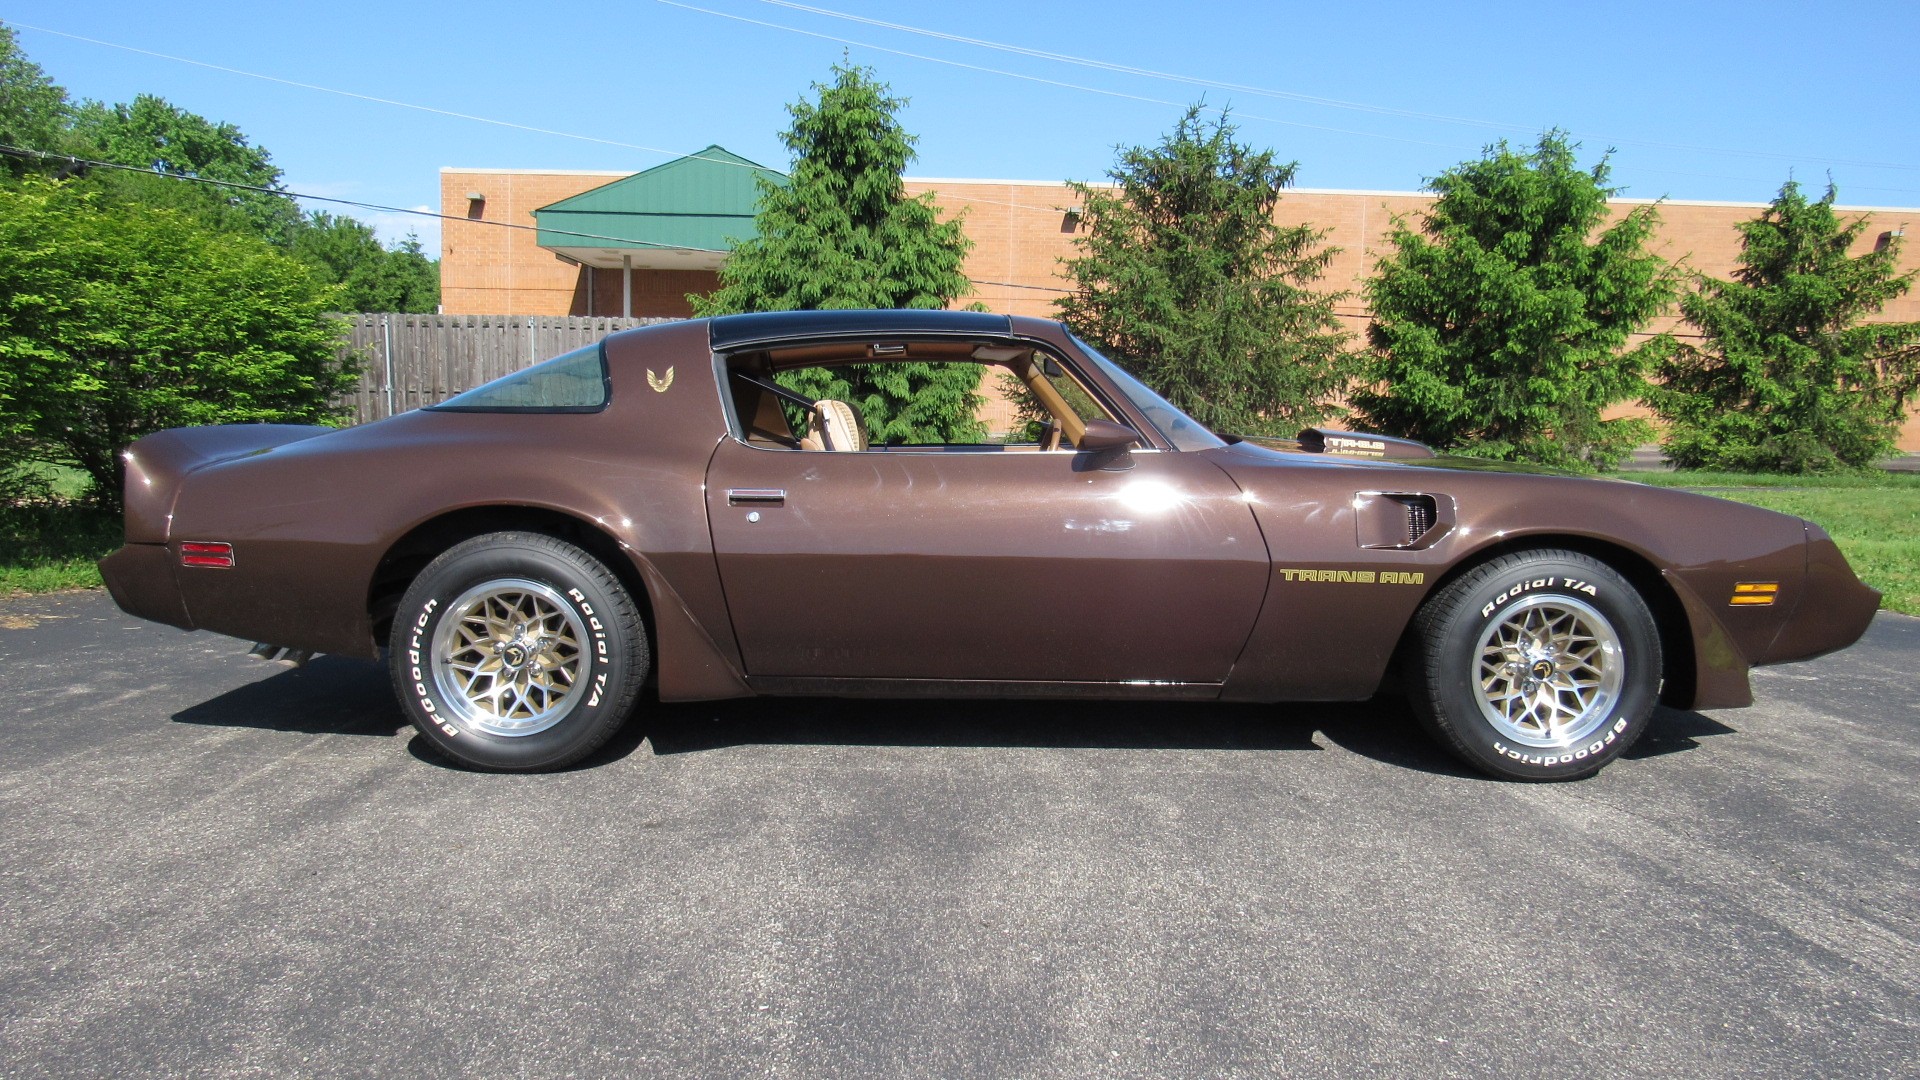 1979 TA, 4 Speed, Numbers Match, Restored, SOLD!